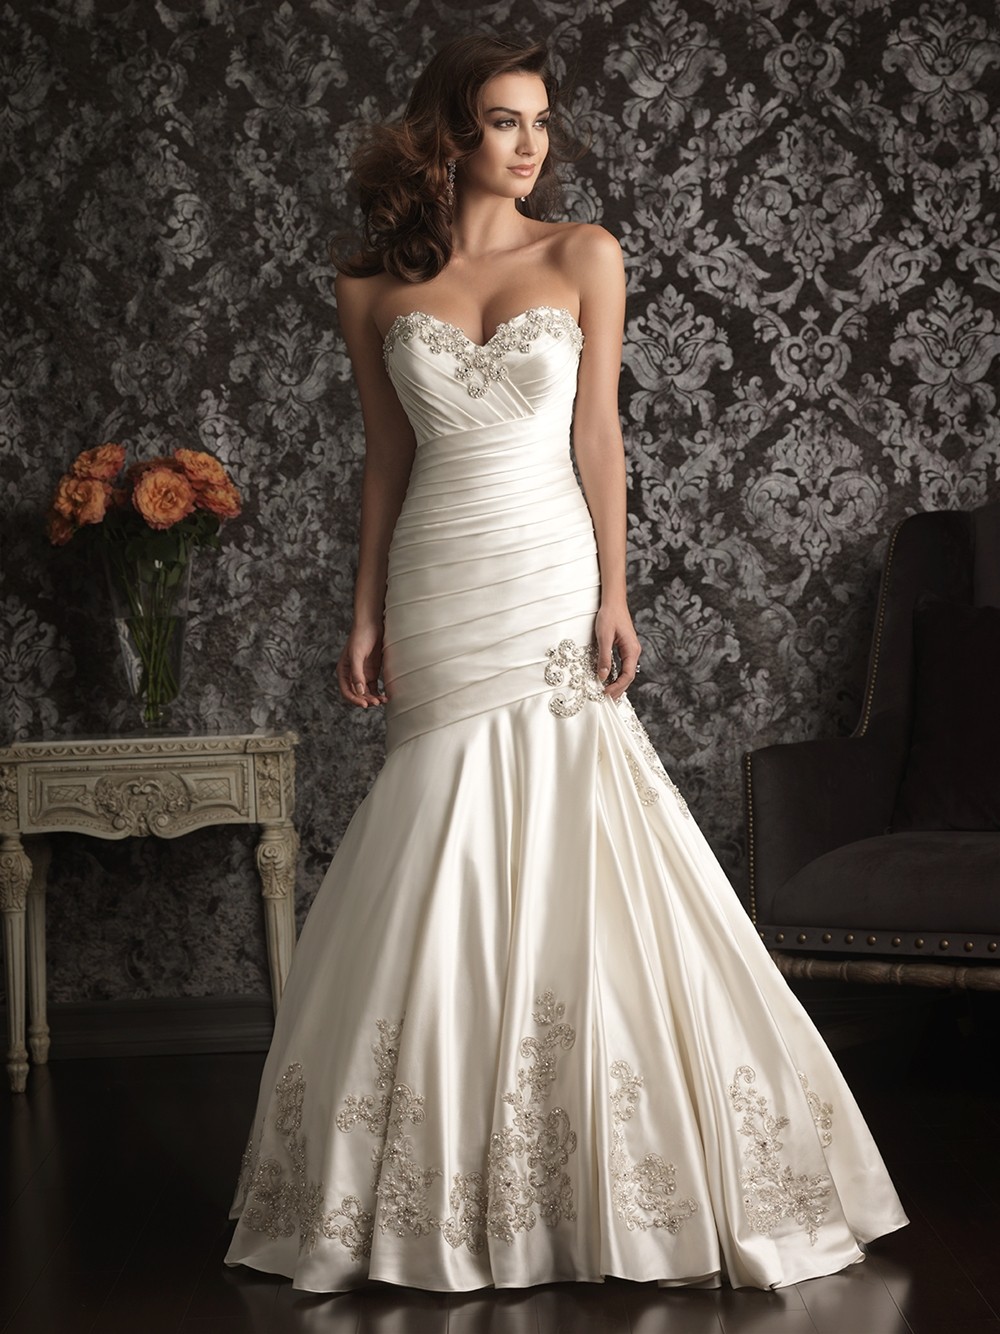 Amazing Short Sweetheart Wedding Dress of the decade The ultimate guide ...